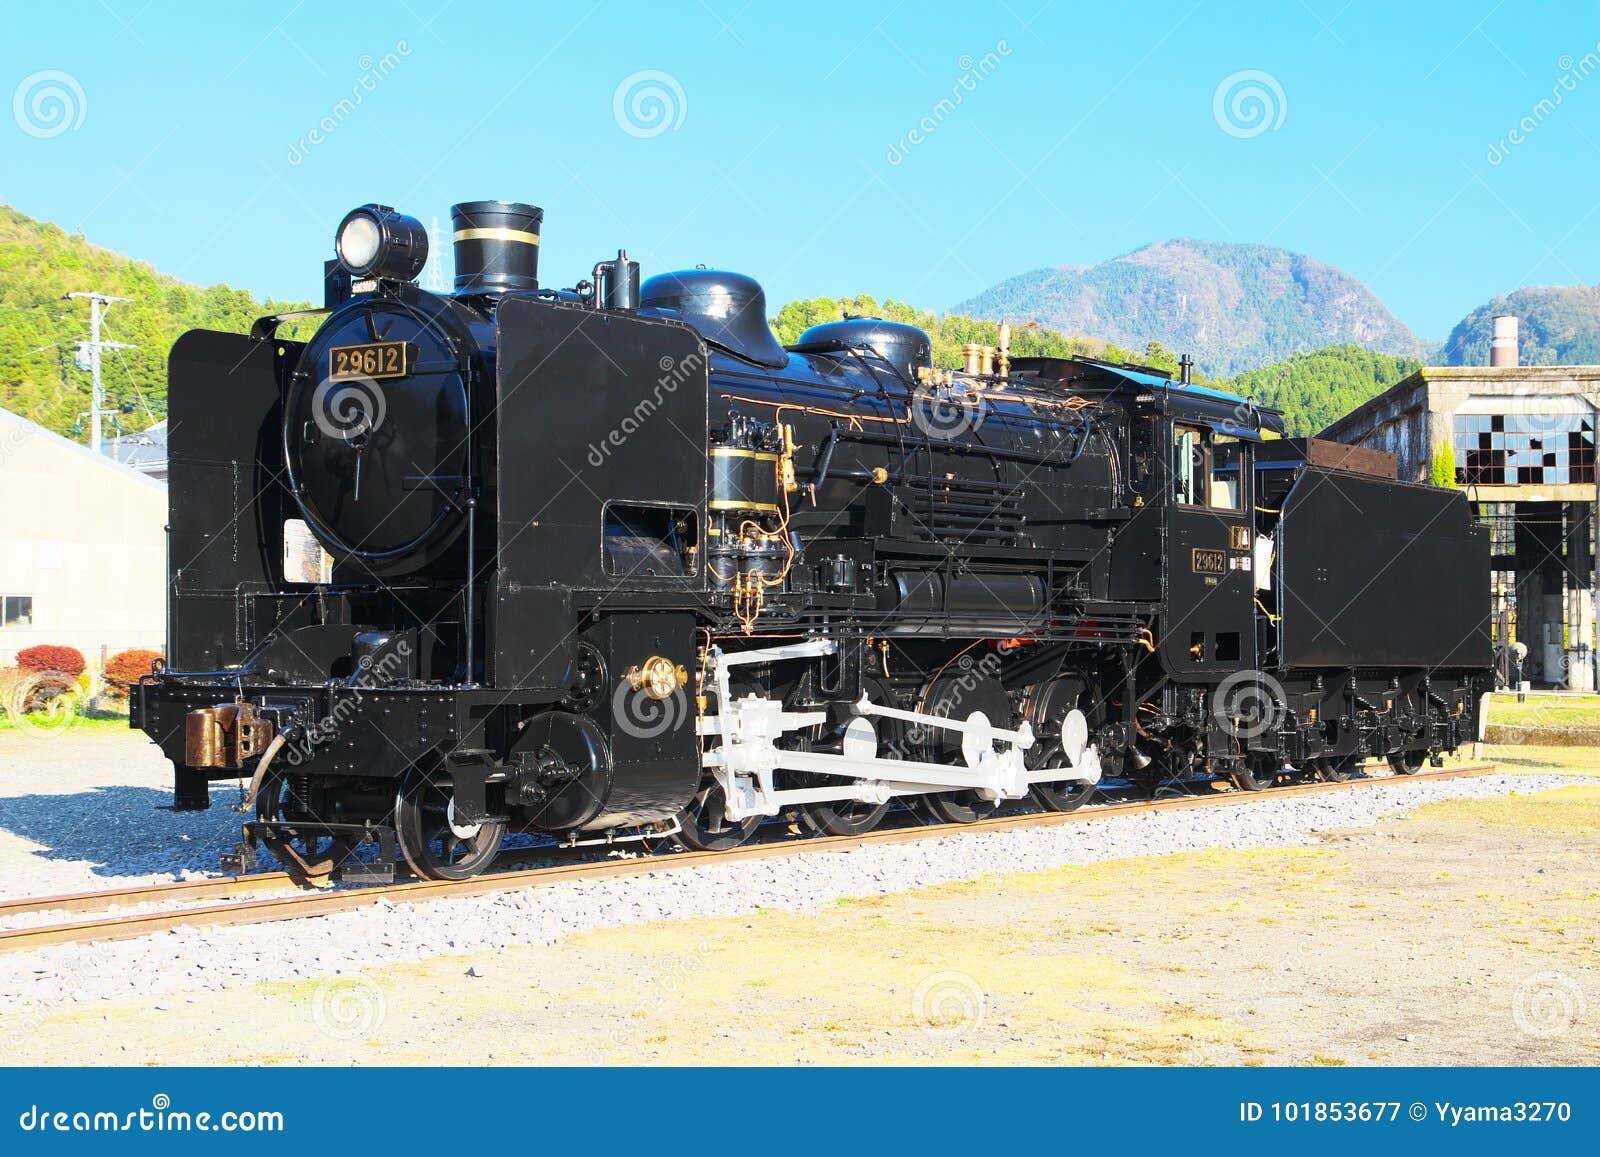 The Steam Locomotive Of Jnr Class 9600 In Kusu Oita Japan Editorial Photography Image Of Roundhouse Clear